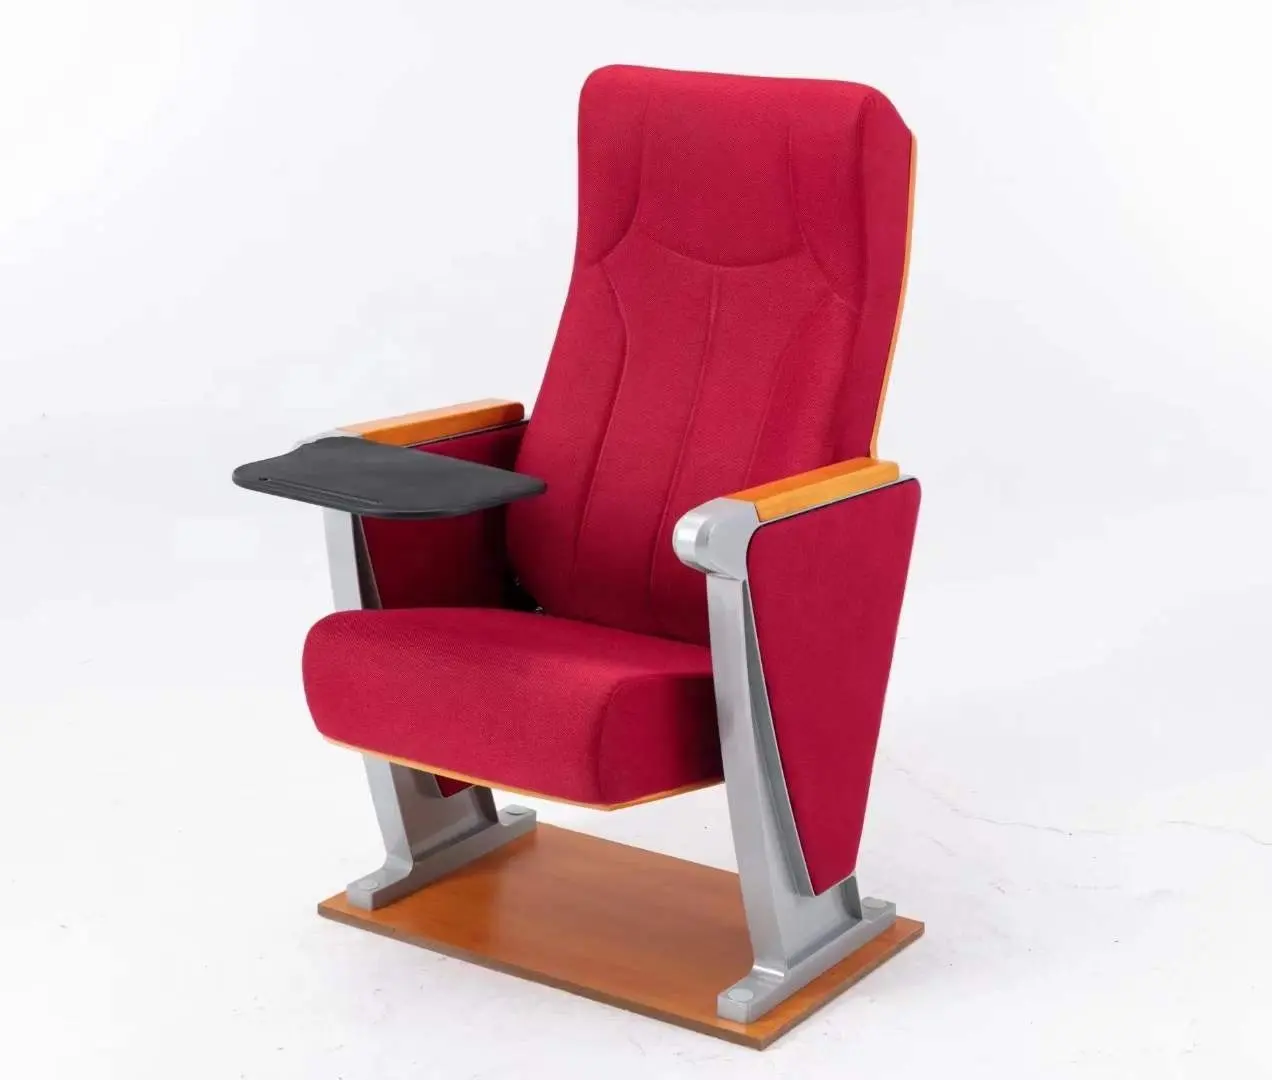 2022 New style auditorium chair study chair with writing pad